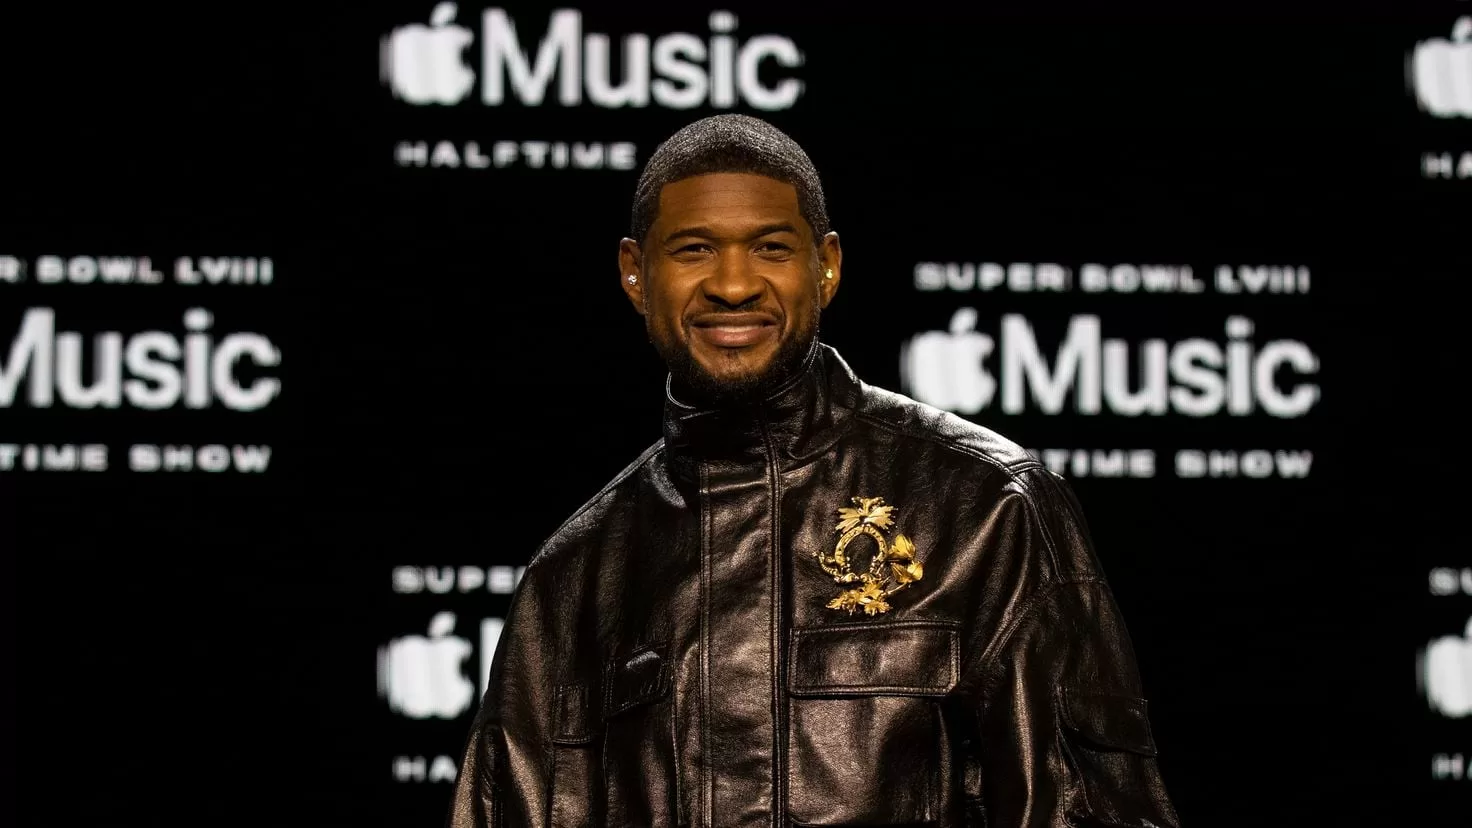 Who could be some of the guest stars in Usher's performance at the Super Bowl halftime show?
